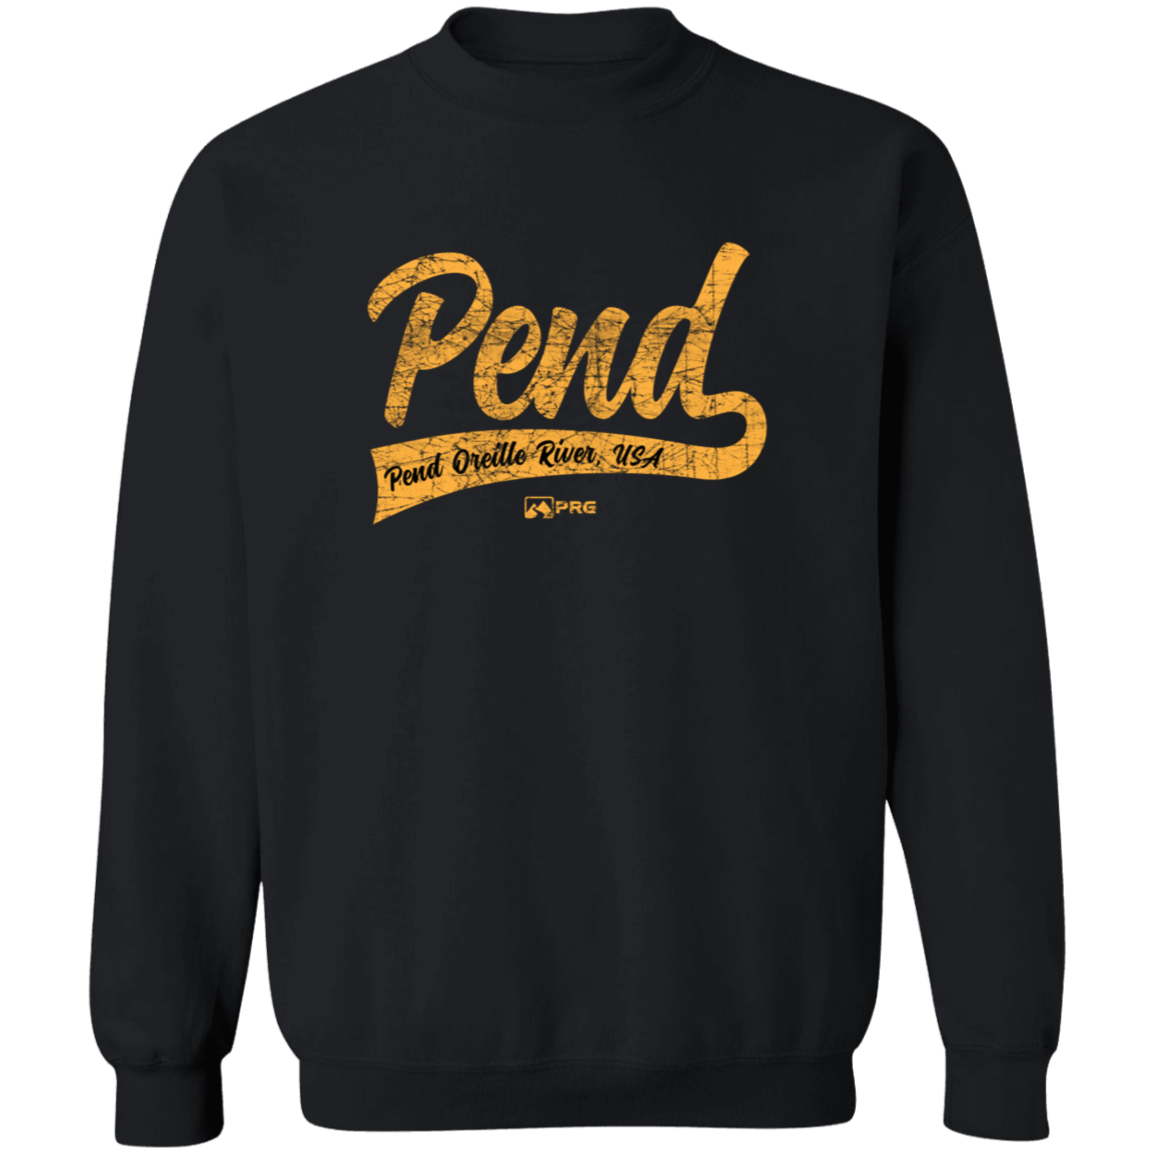 Pend for the Pennant - Sweatshirt